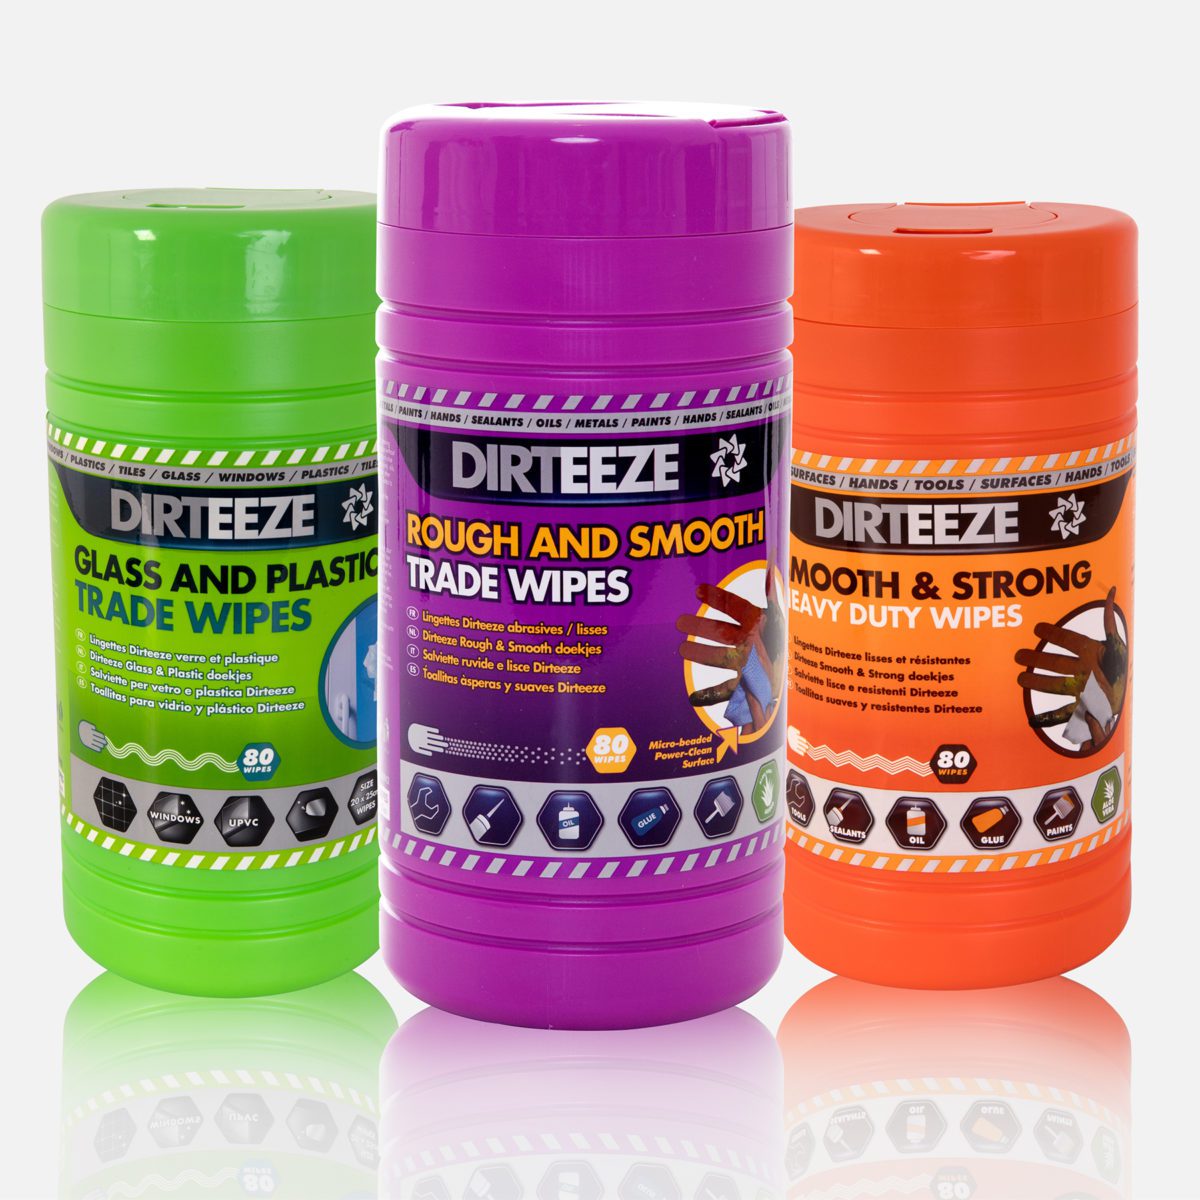 Trade Wipes Product Category